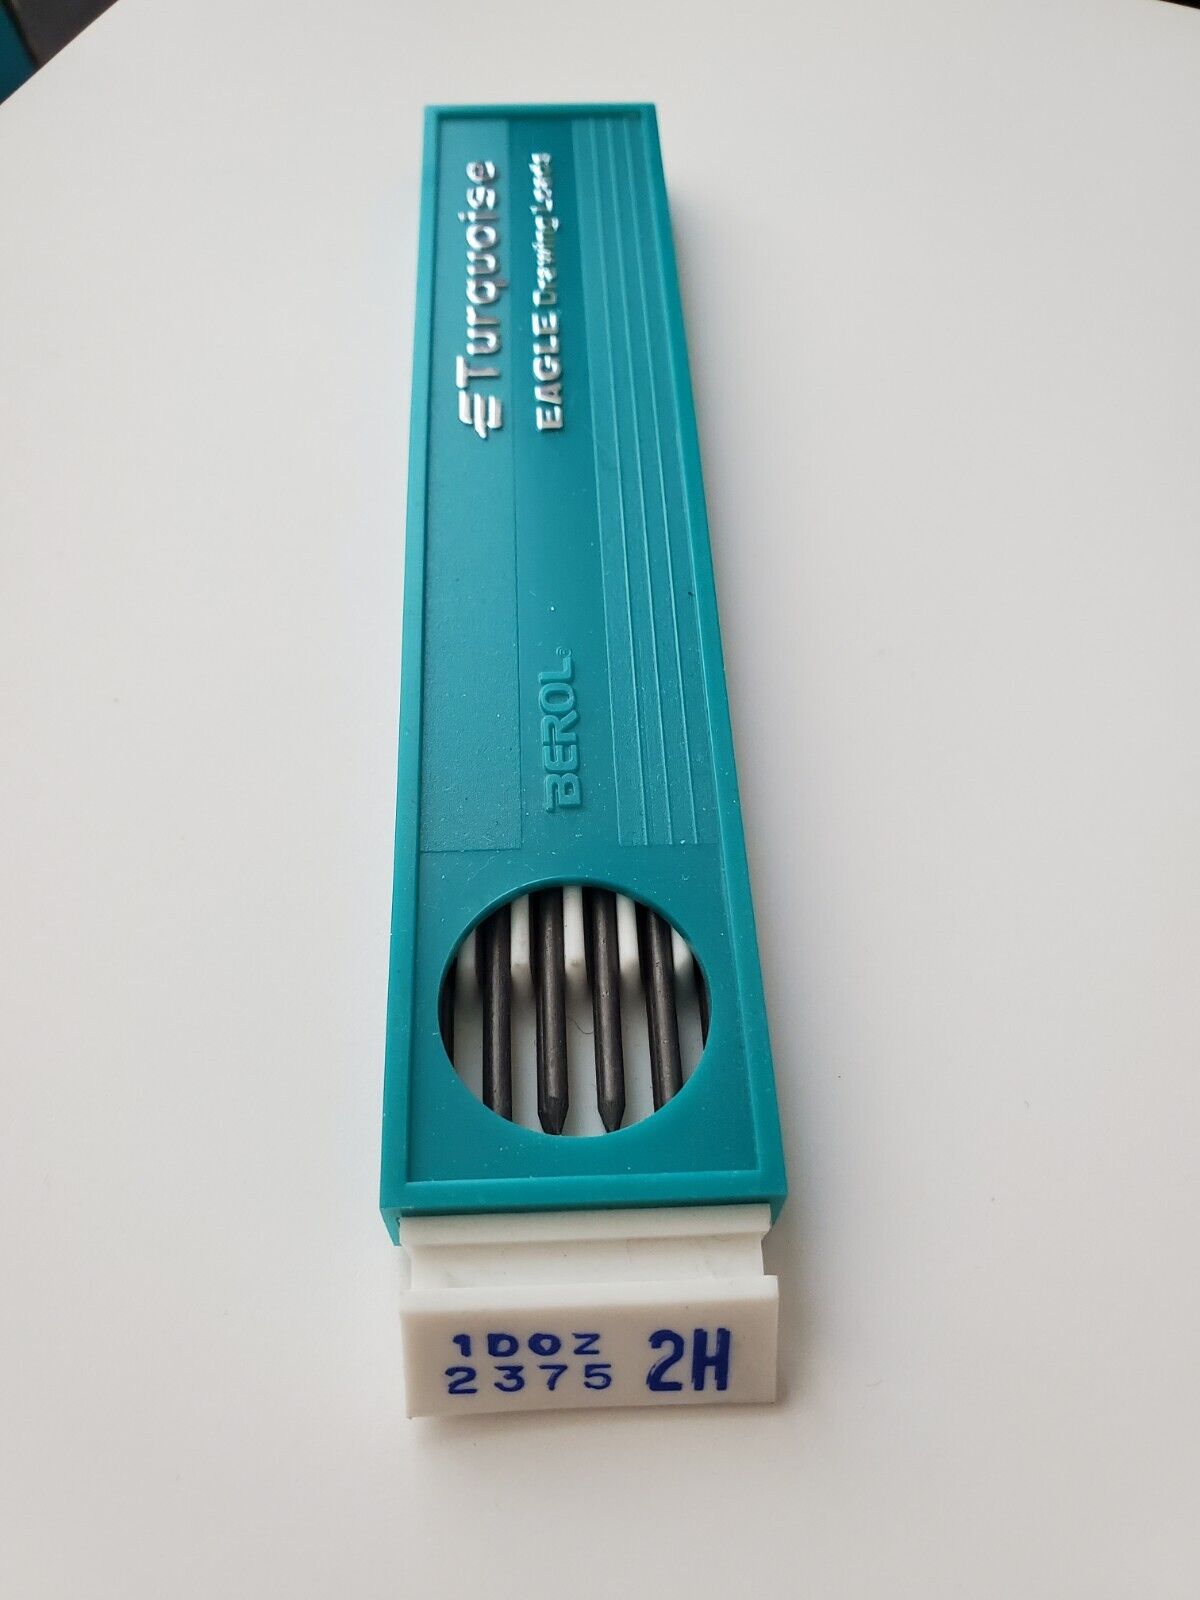 Vintage Berol Turquoise Drawing Pencil Leads -  2375 H - 12 Leads/Box 